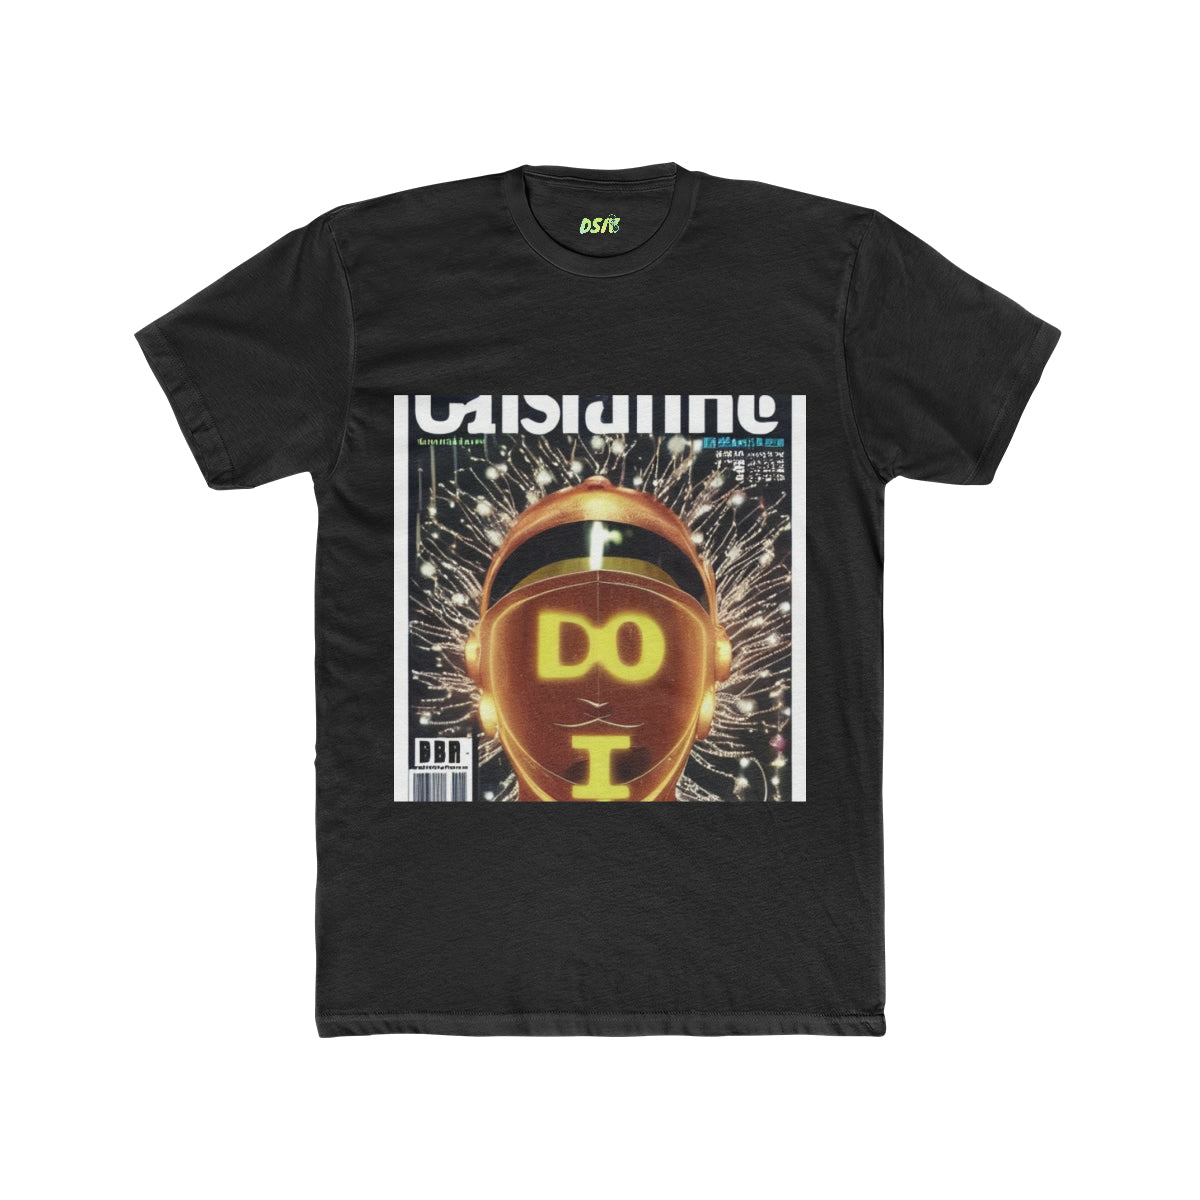 DO I - Obey The Code T-Shirt Collection